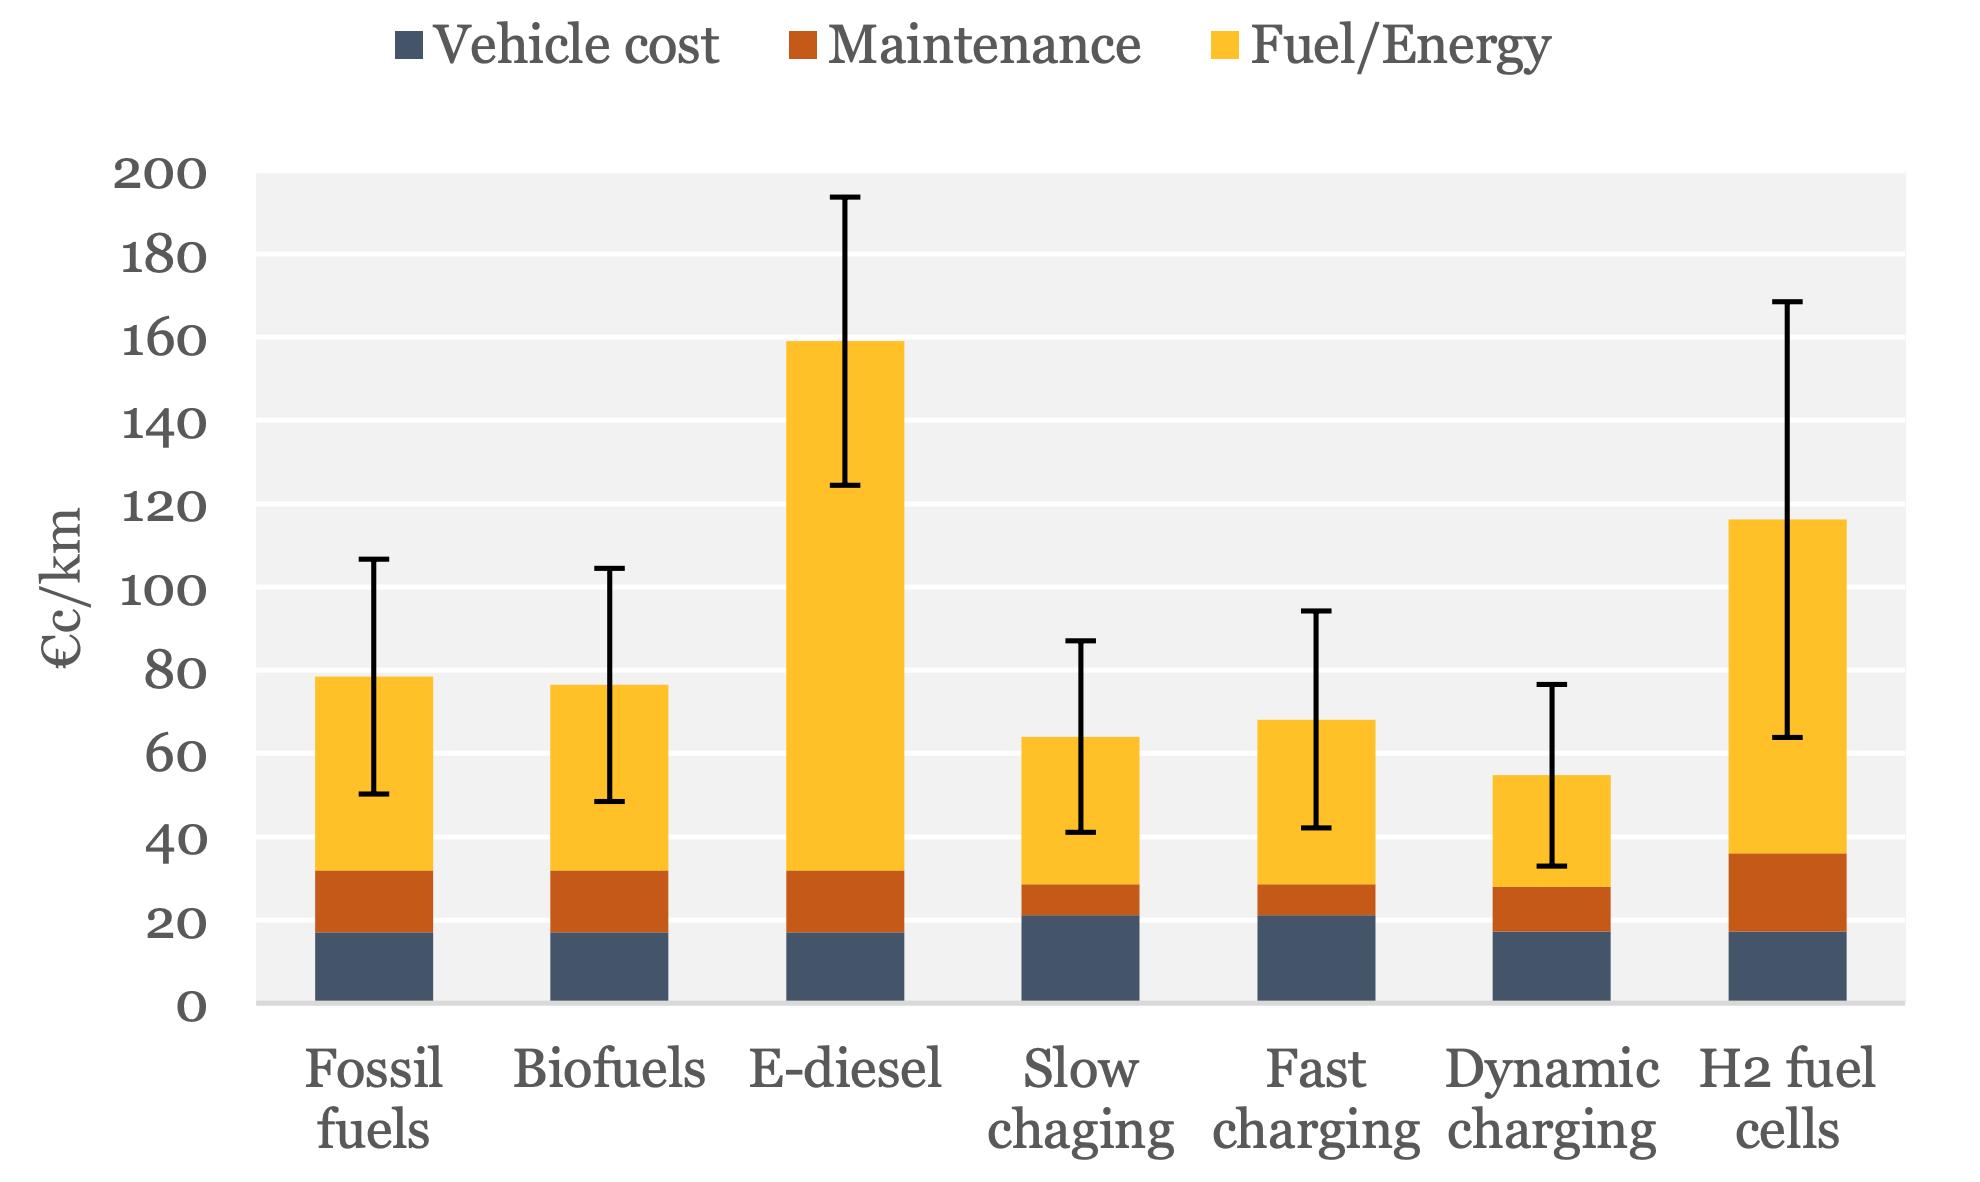 Figure 5-2: Distance-levelized lifecycle costs of heavy-duty vehicles from RISE report with permission